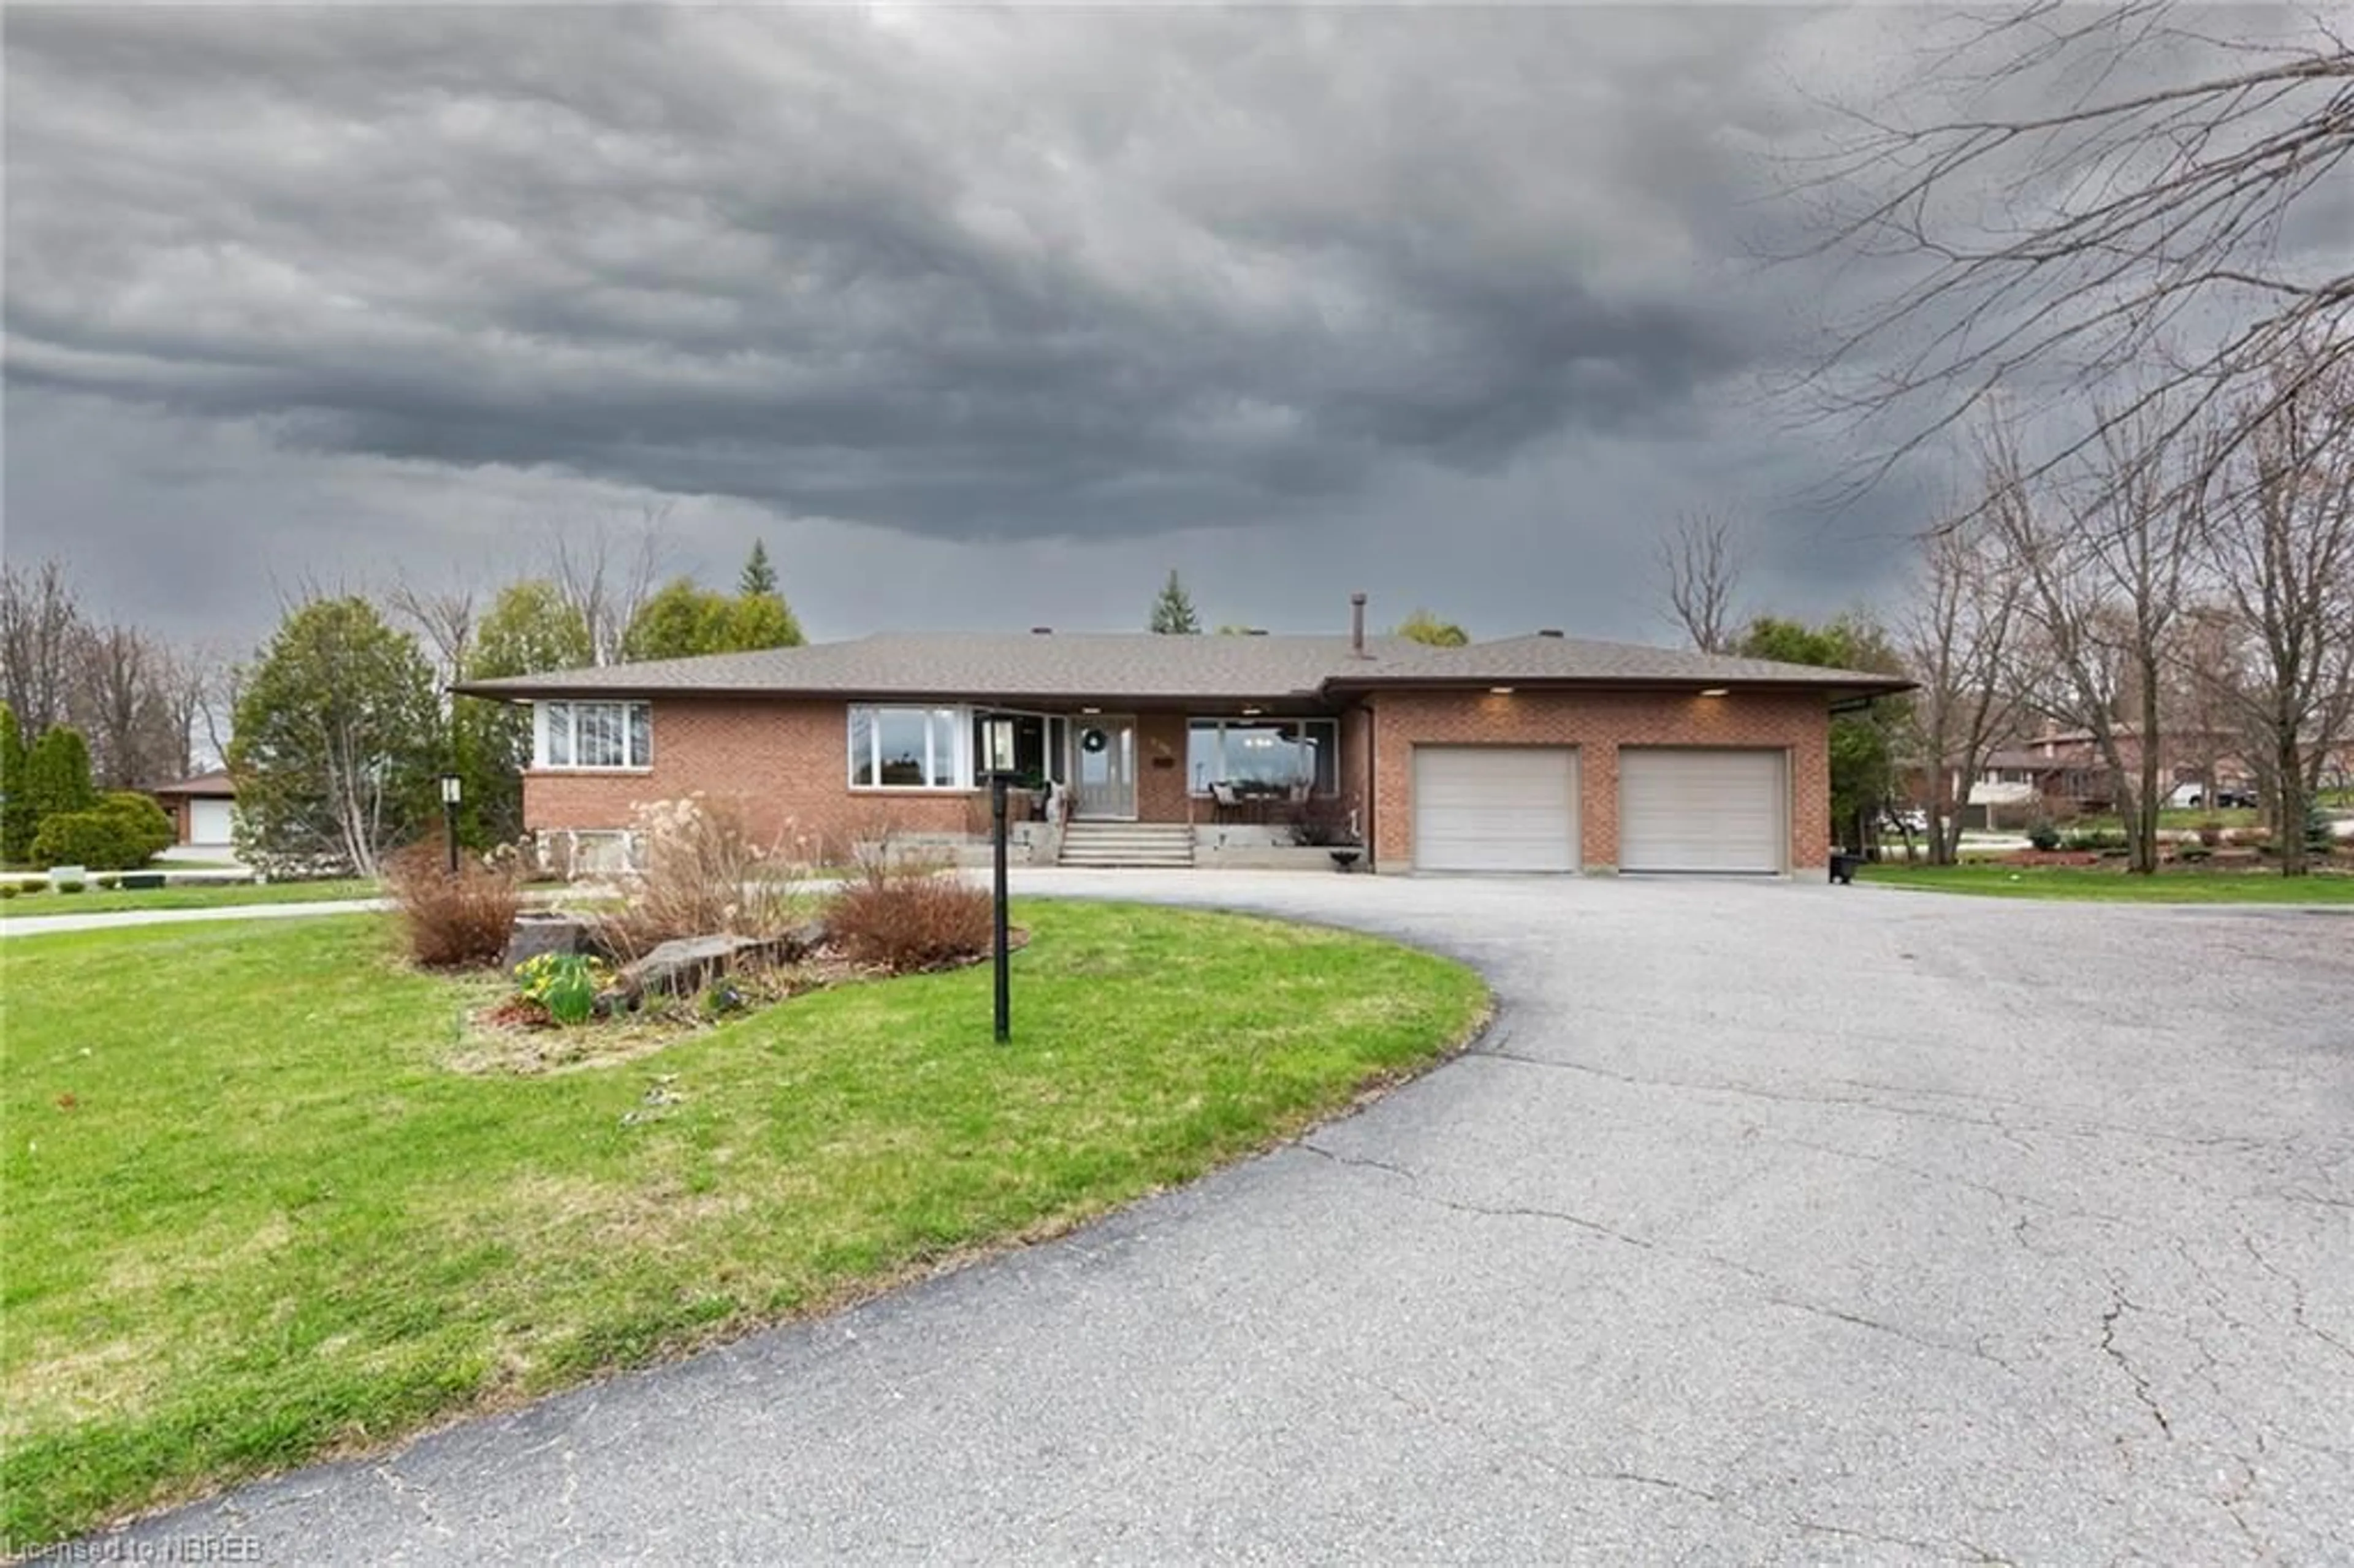 Frontside or backside of a home for 406 Surrey Dr, North Bay Ontario P1C 1E5